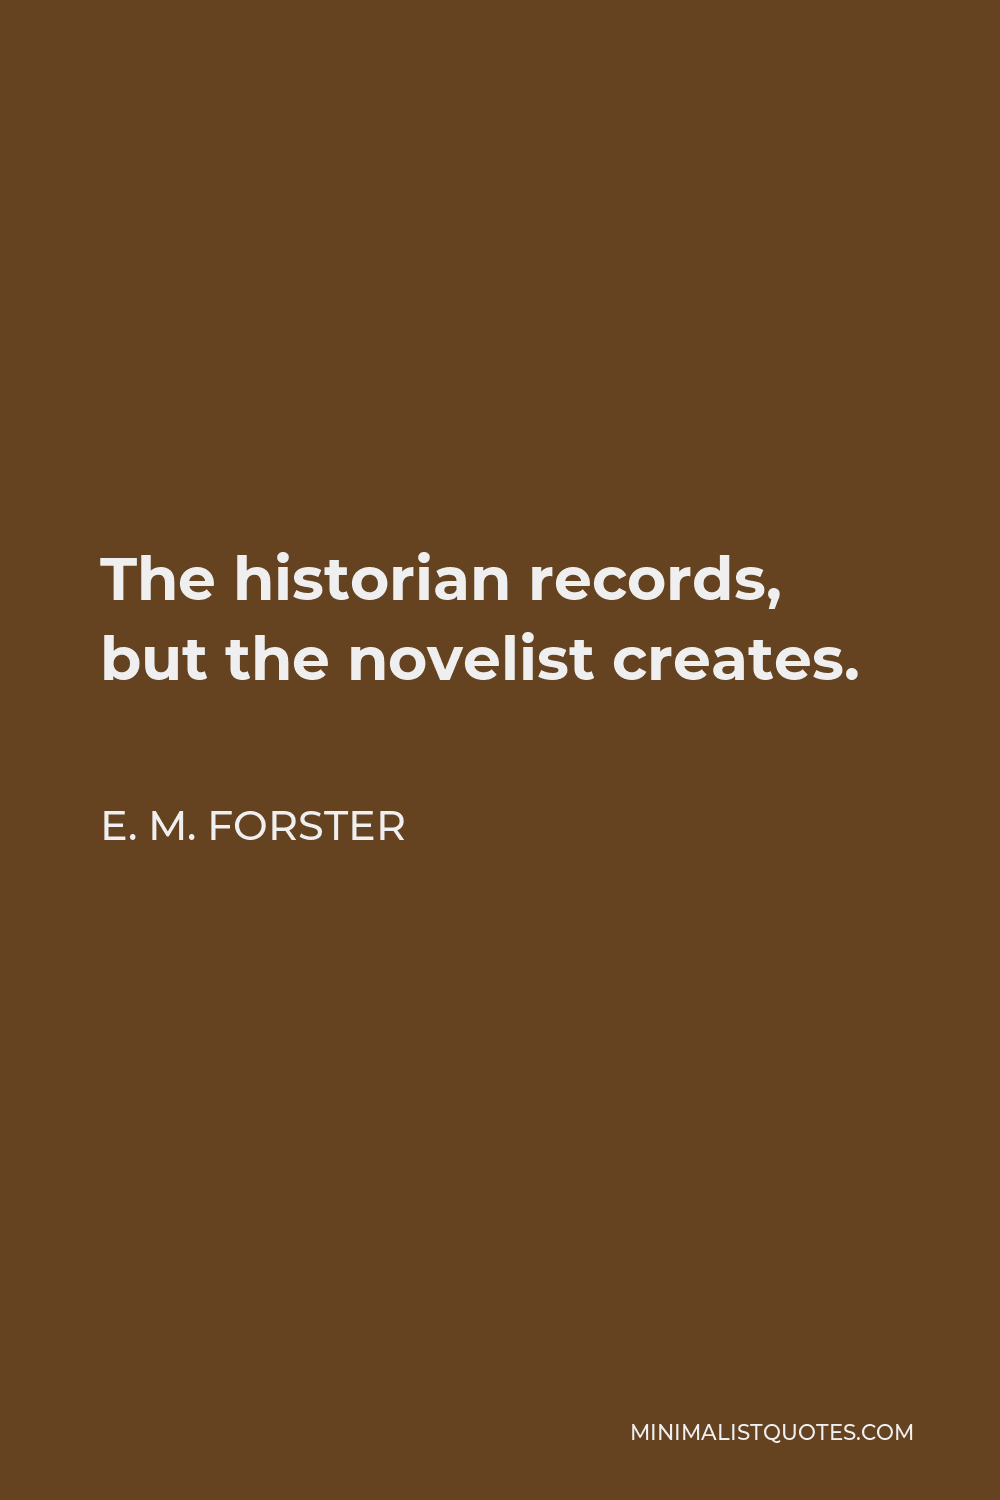 E. M. Forster Quote - The historian records, but the novelist creates.